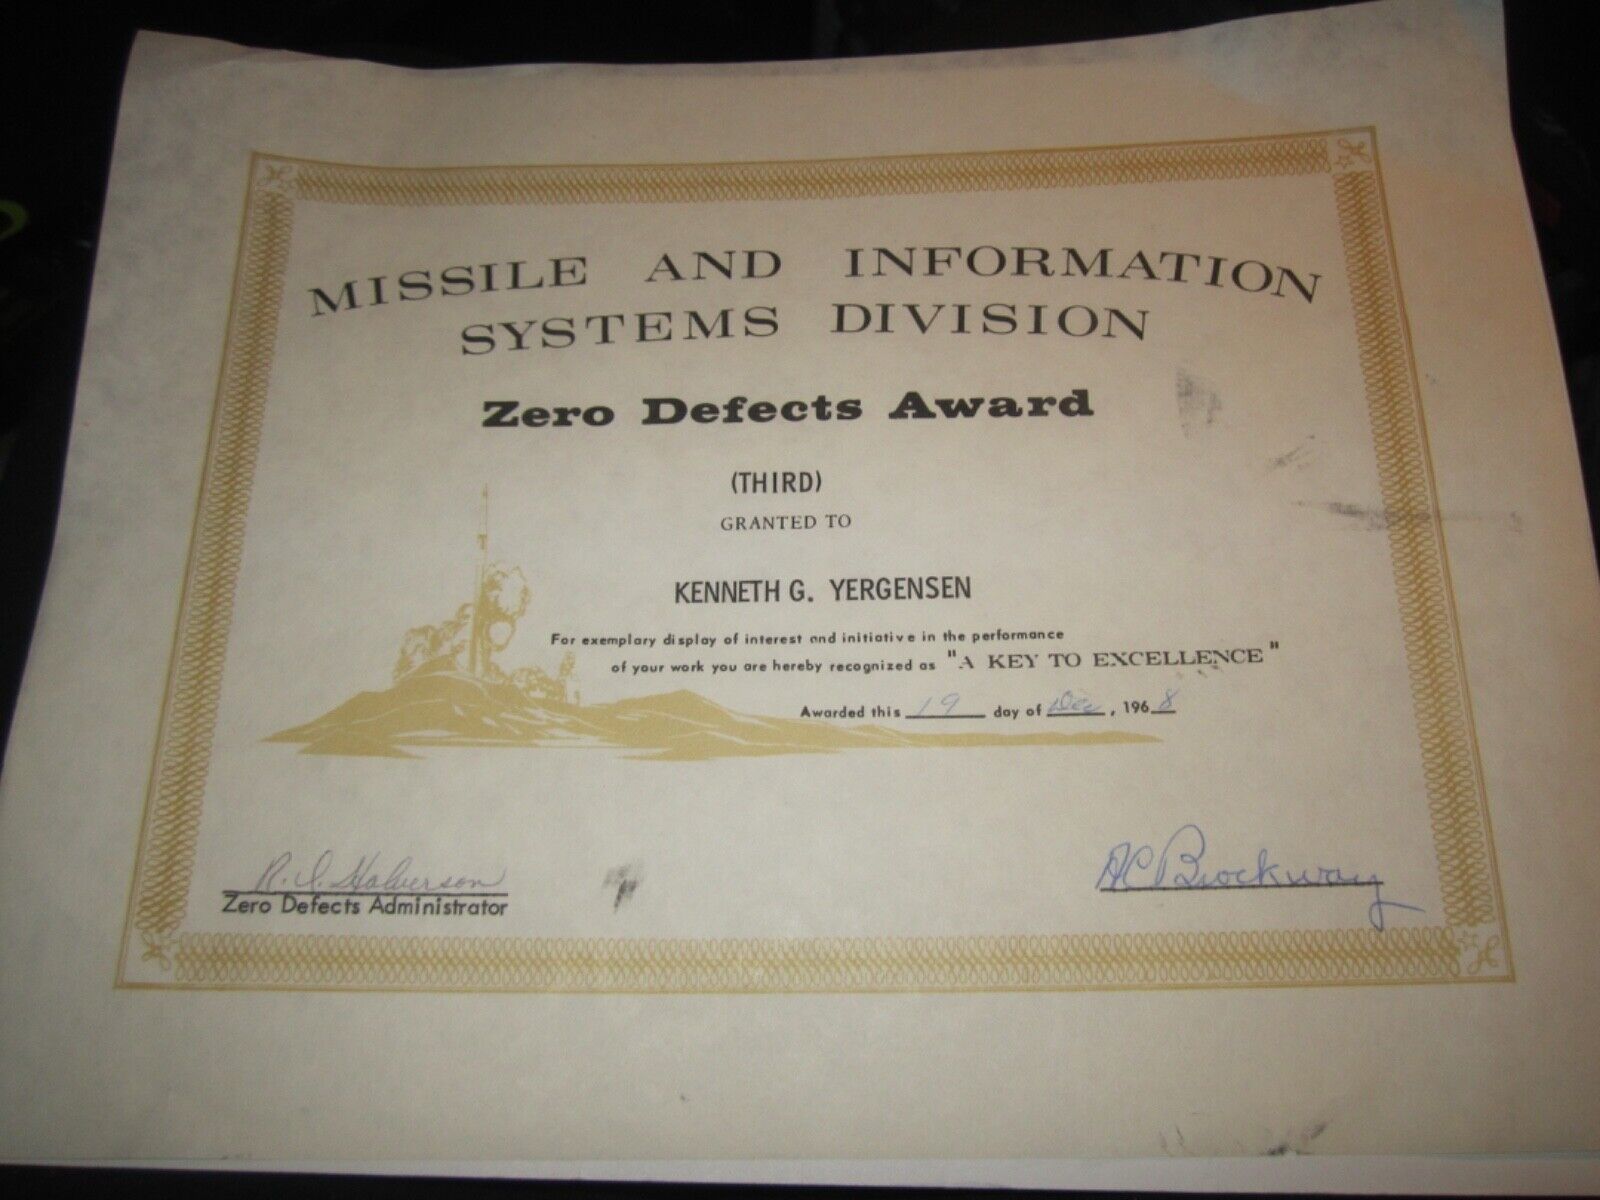 1968 U.S. NAVY MISSILE AND INFO ZERO DEFECTS AWARD CERTIFICATE SIGNED - BBA-52